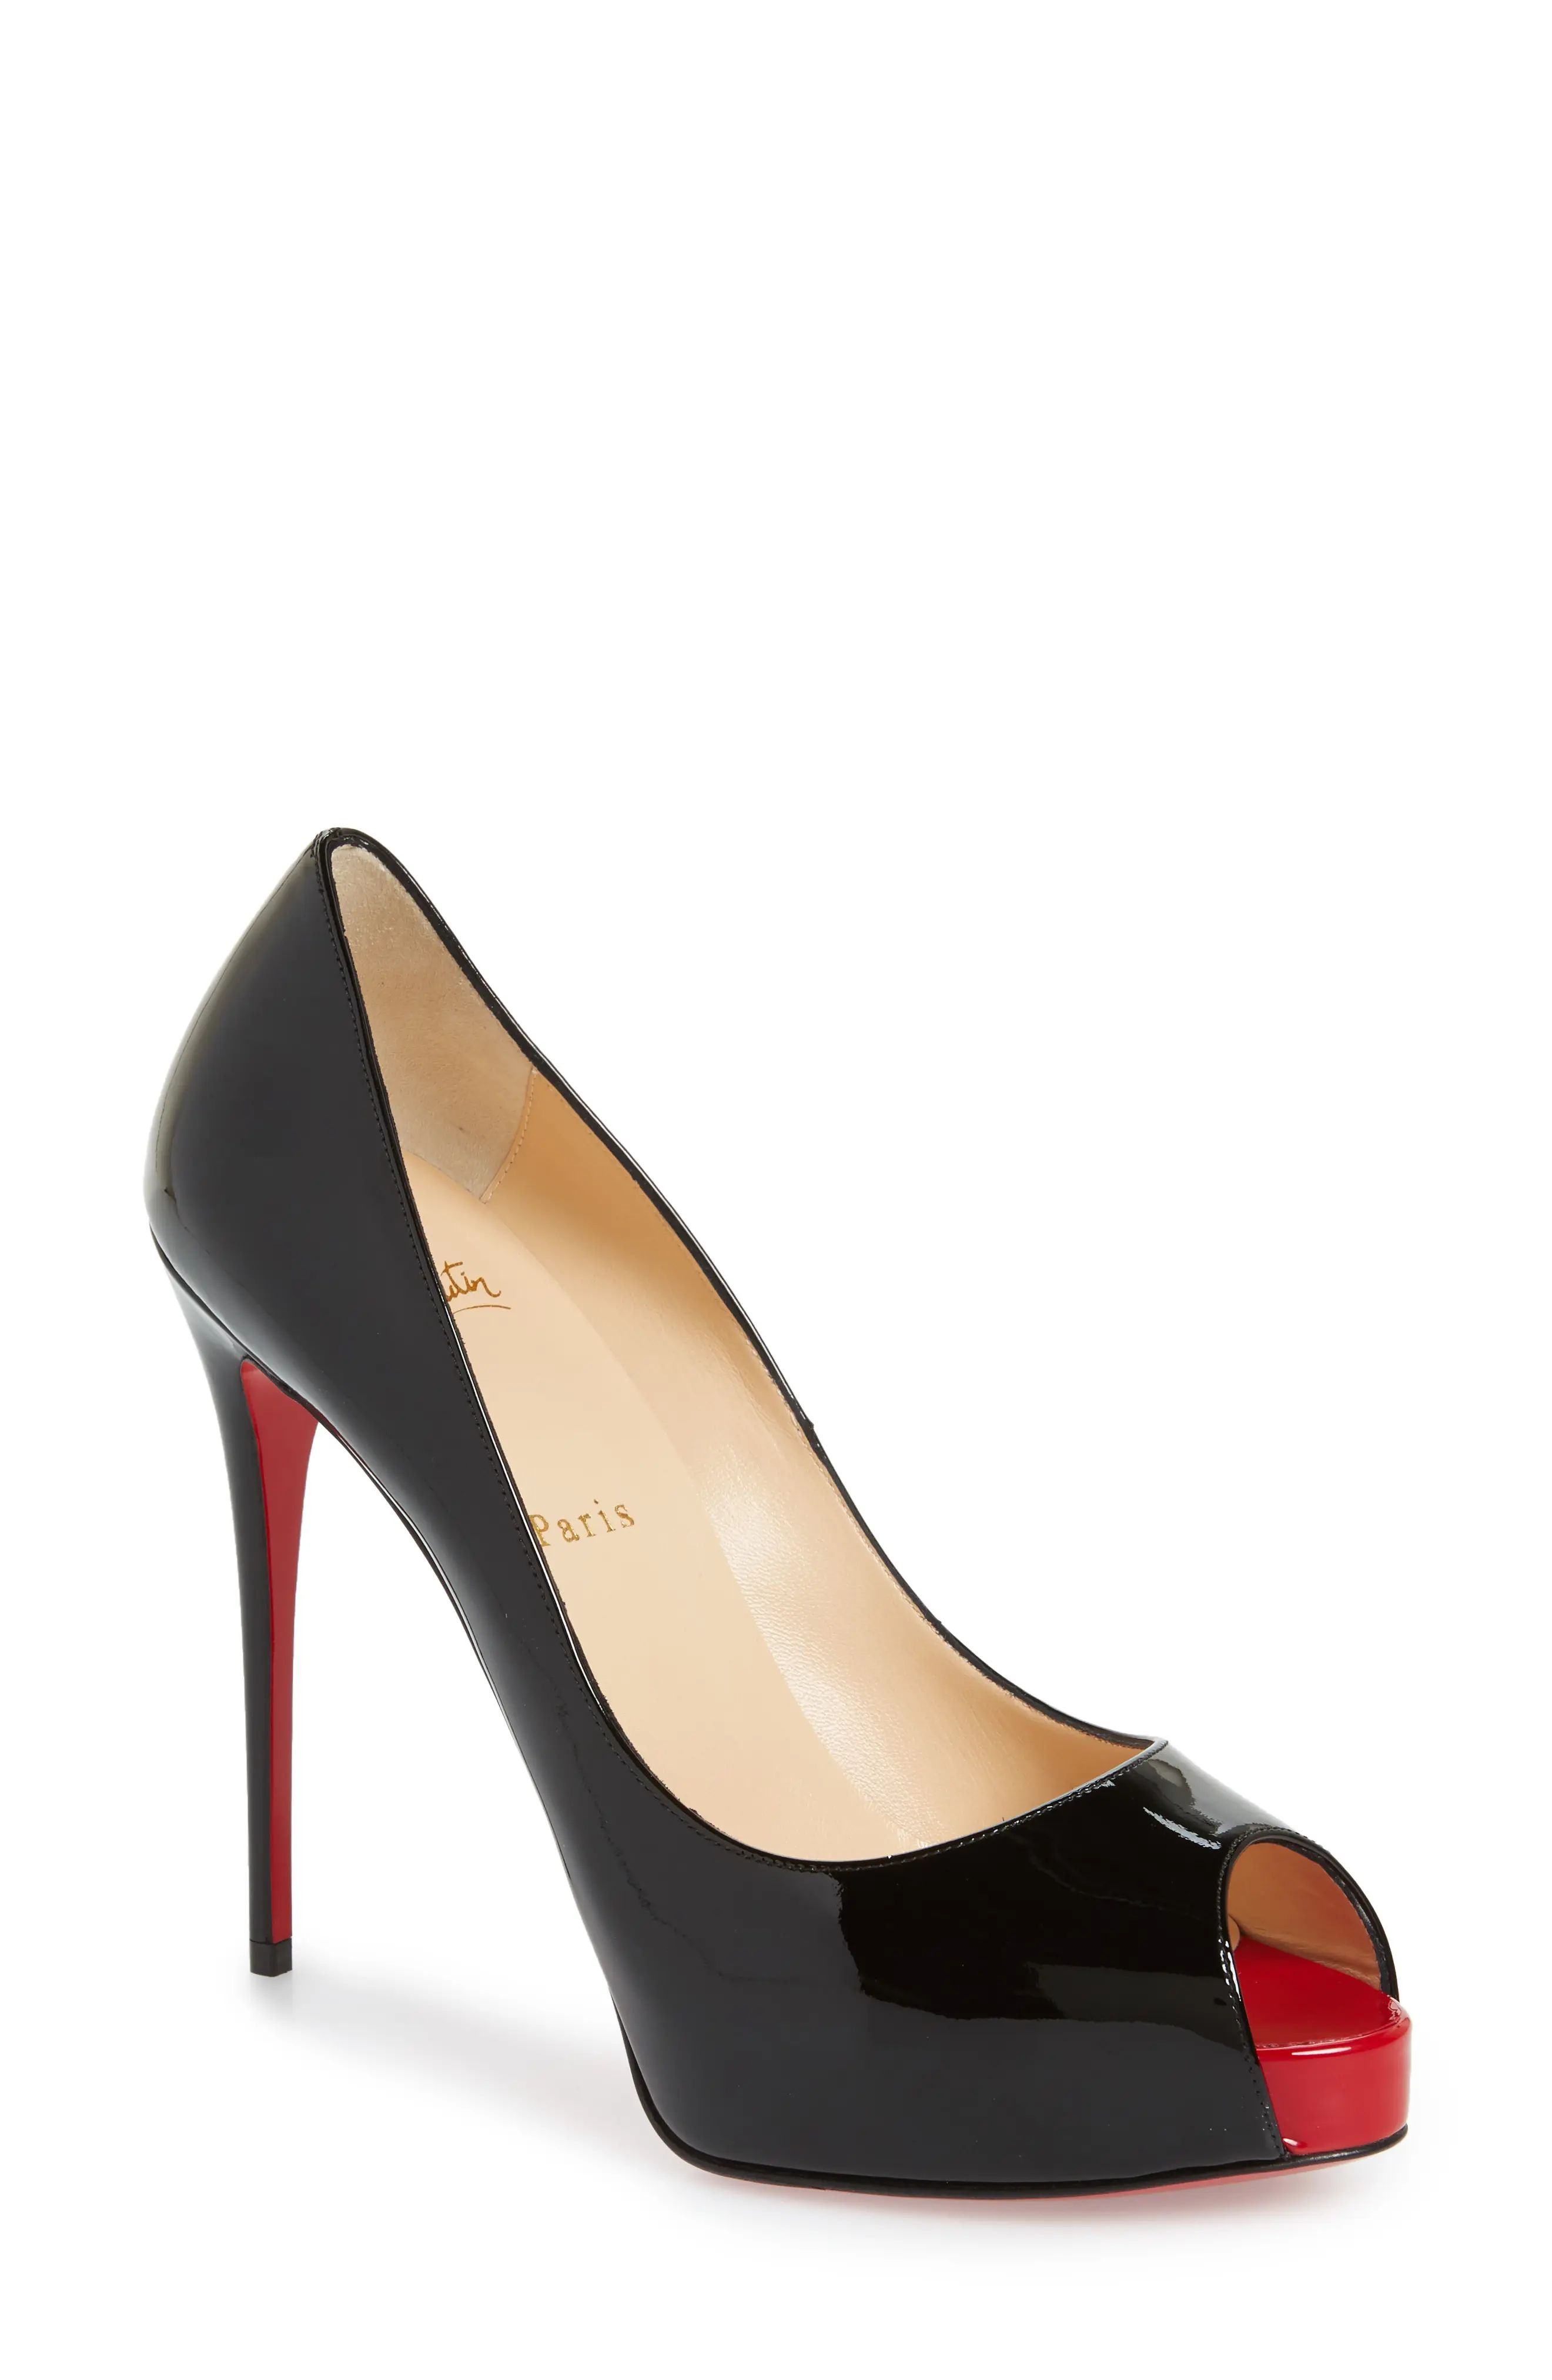 Christian Louboutin Prive Open Toe Pump in Black/Red at Nordstrom, Size 4Us | Nordstrom